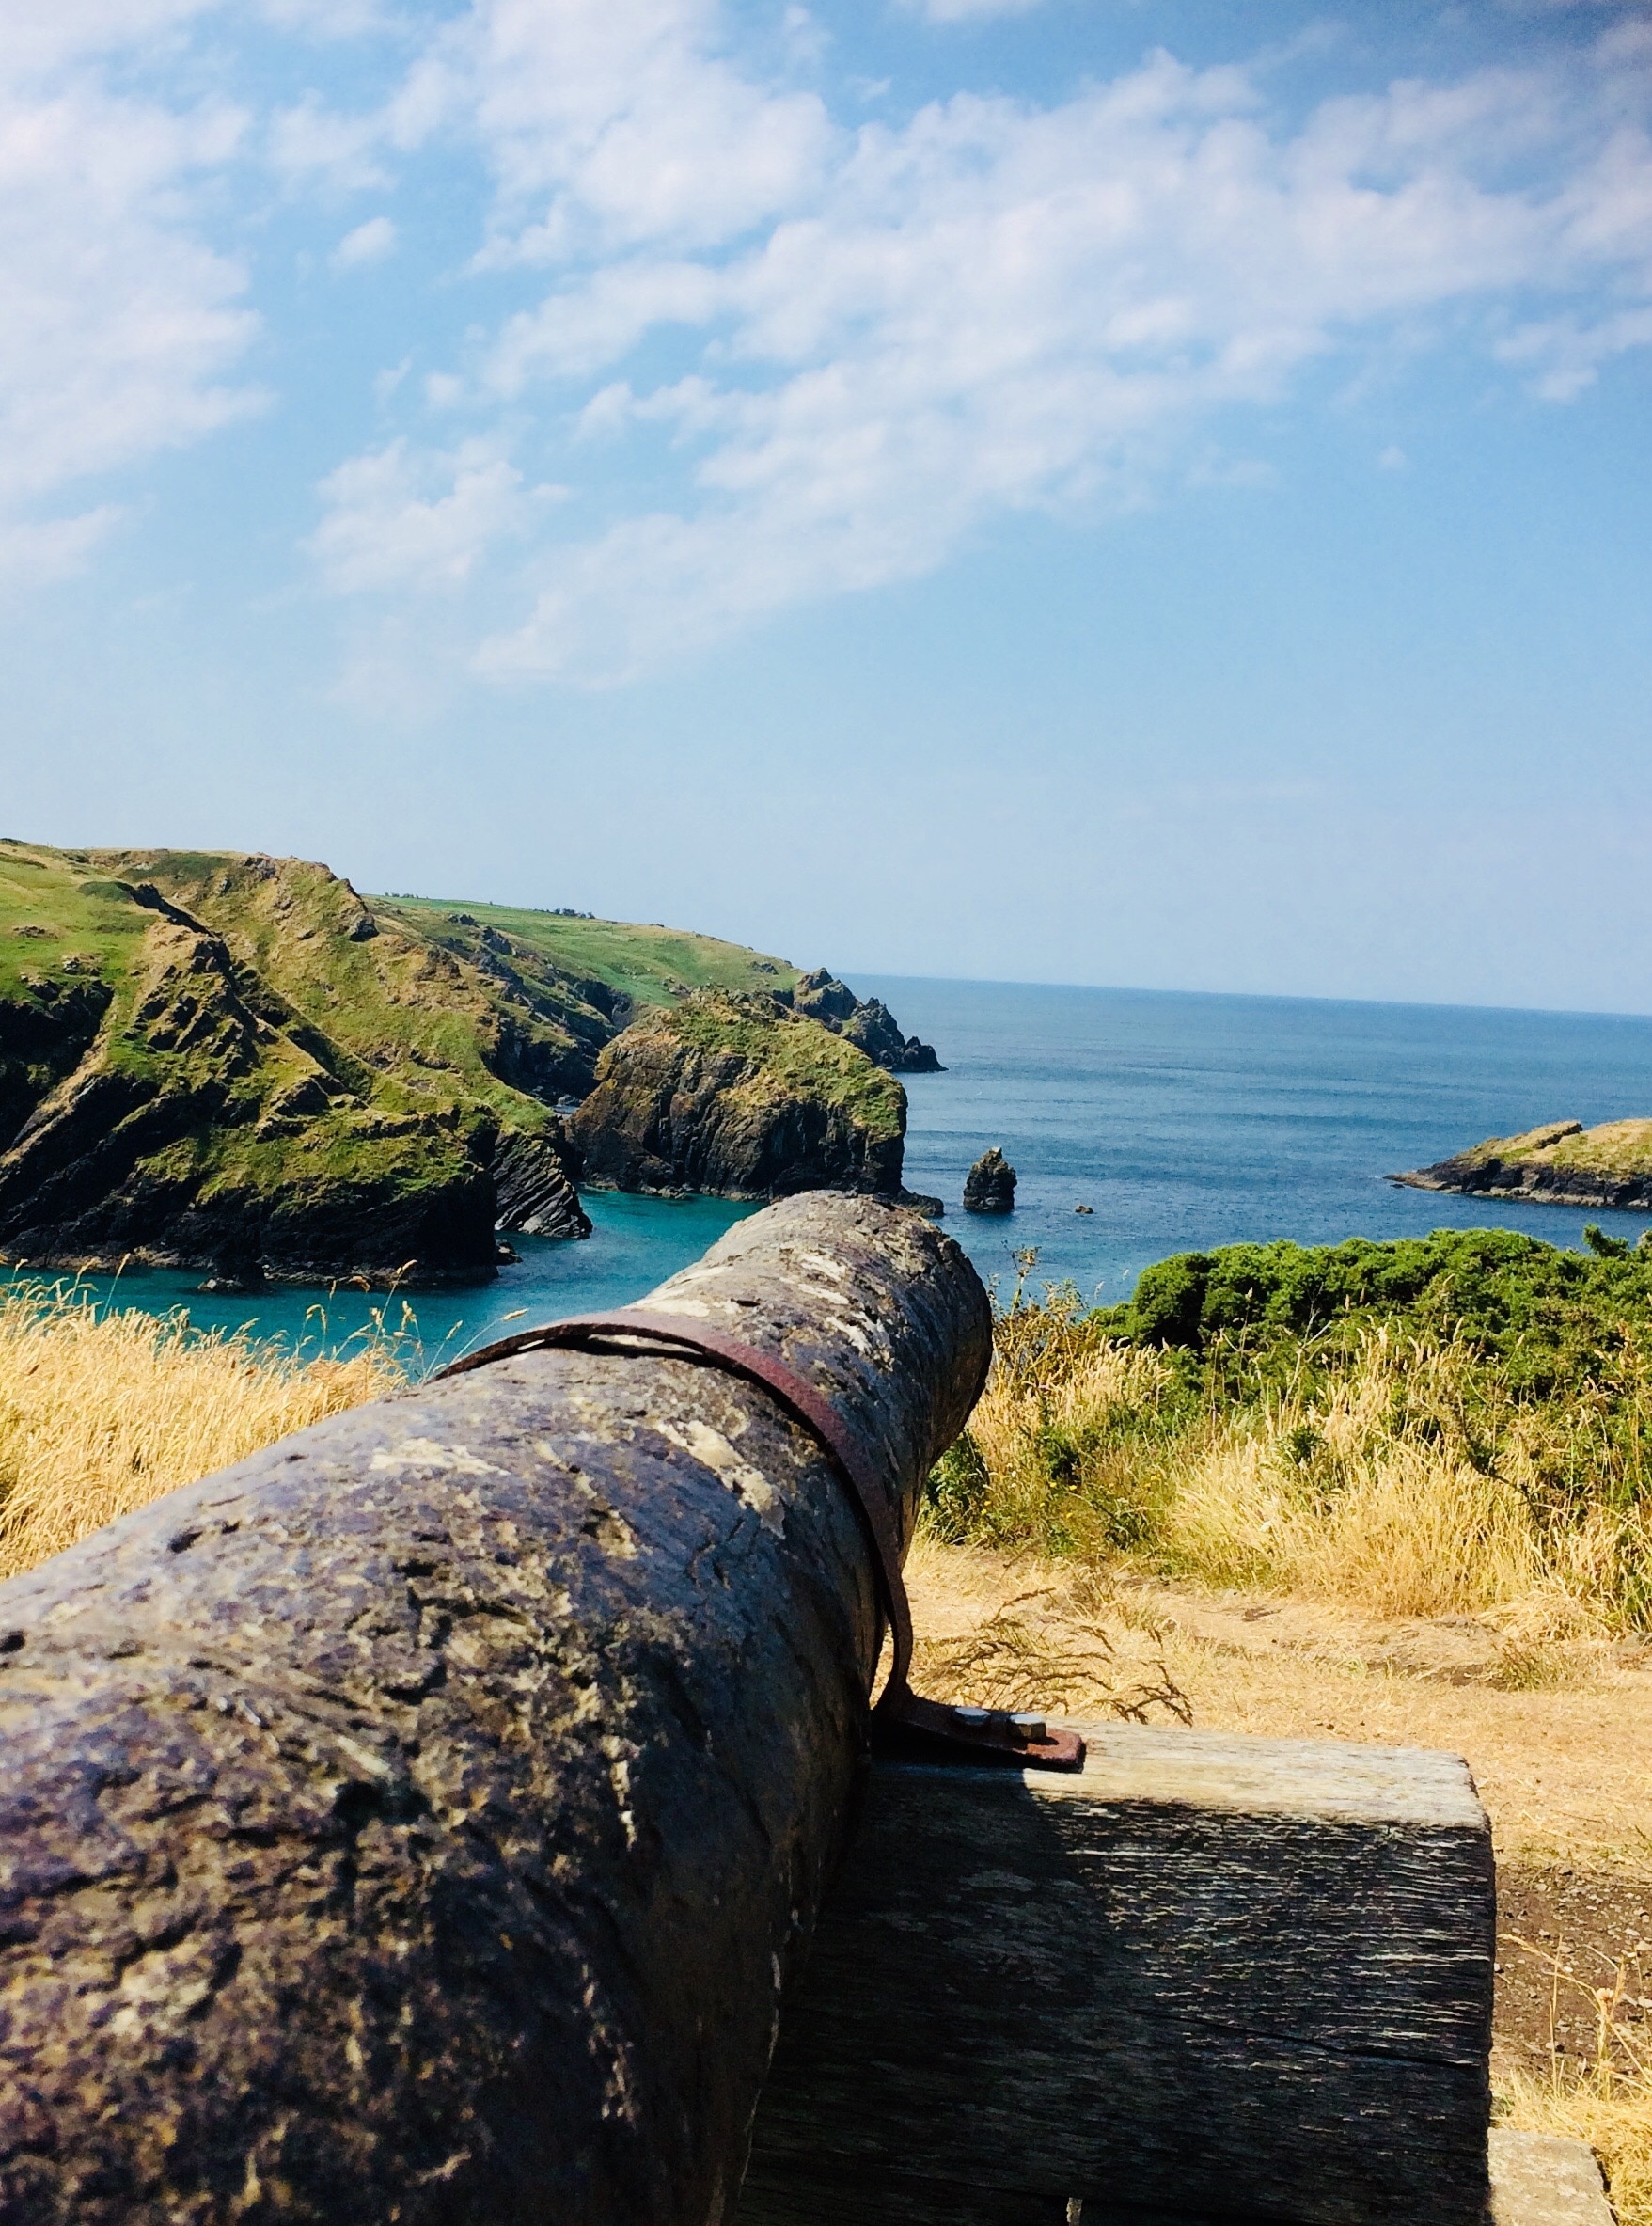 This real beauty of a cannon , still sits proud    Guarding our shores over the Cornish seas.